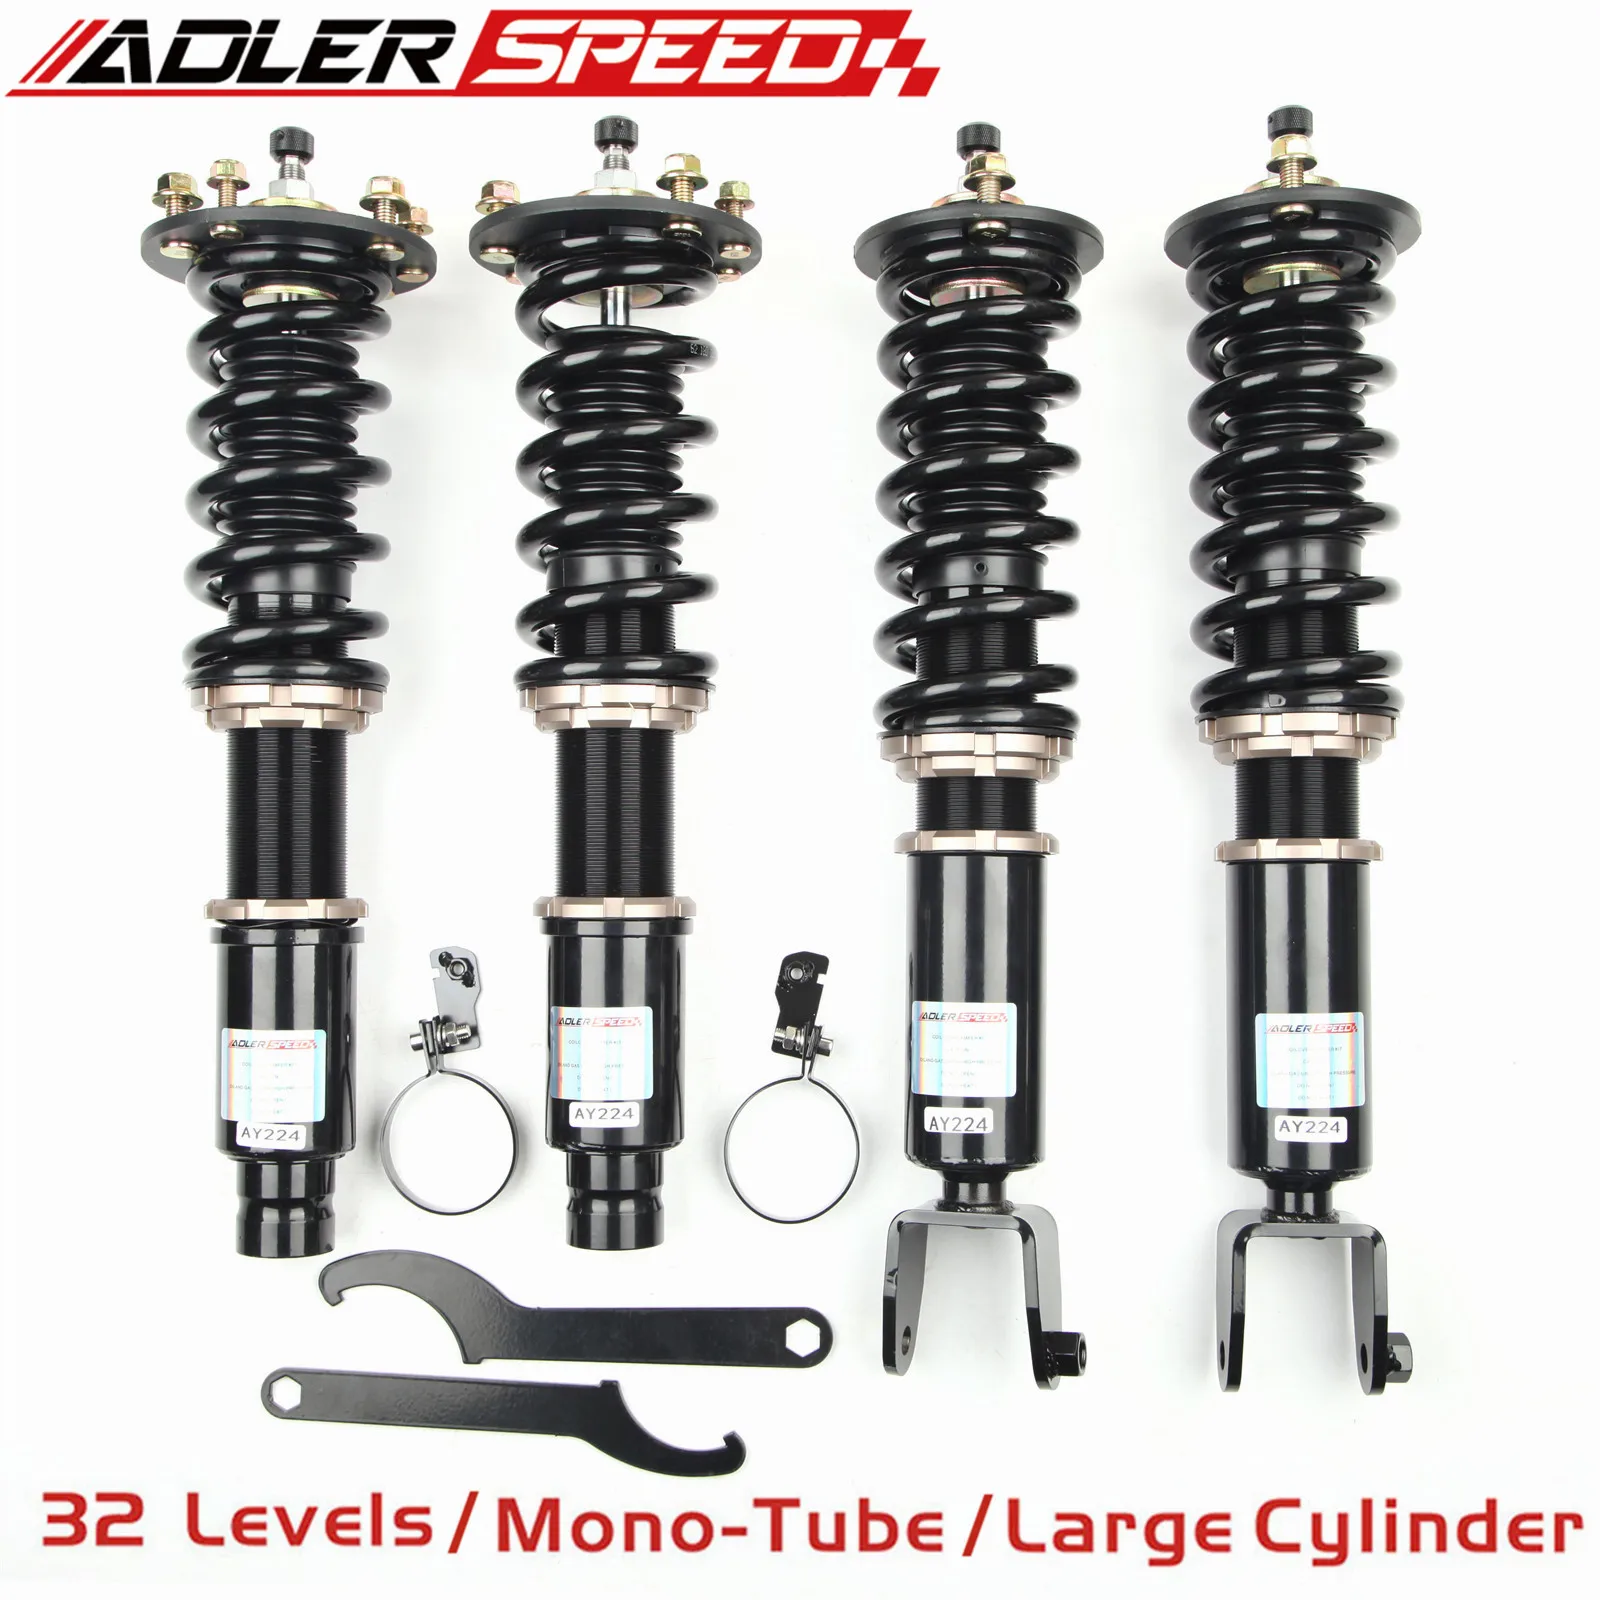 

ADLERSPEED 32 Levels Damper Mono Tube Coilovers Suspension For Acura TL FWD / AWD (UA8/UA9) 2009-14 For Acura TSX (CU) 2009-14